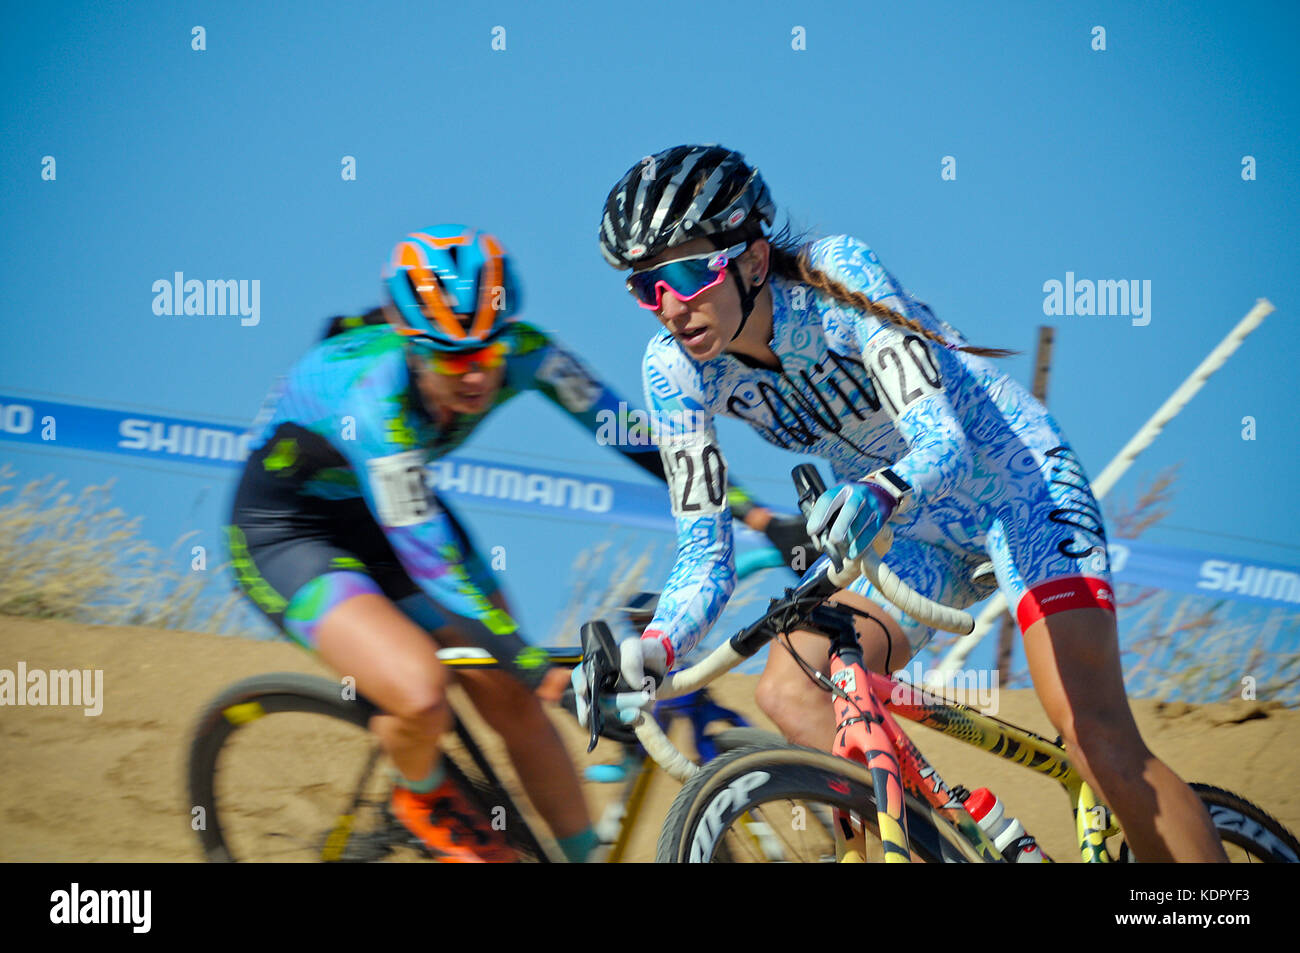 October 14, 2017 - Women's elite cyclists need total concentration to navigate the steep and twisting turns of the cork screw section of the U.S. Open of Cyclocross, Valmont Bike Park, Boulder, Colorado. Stock Photo